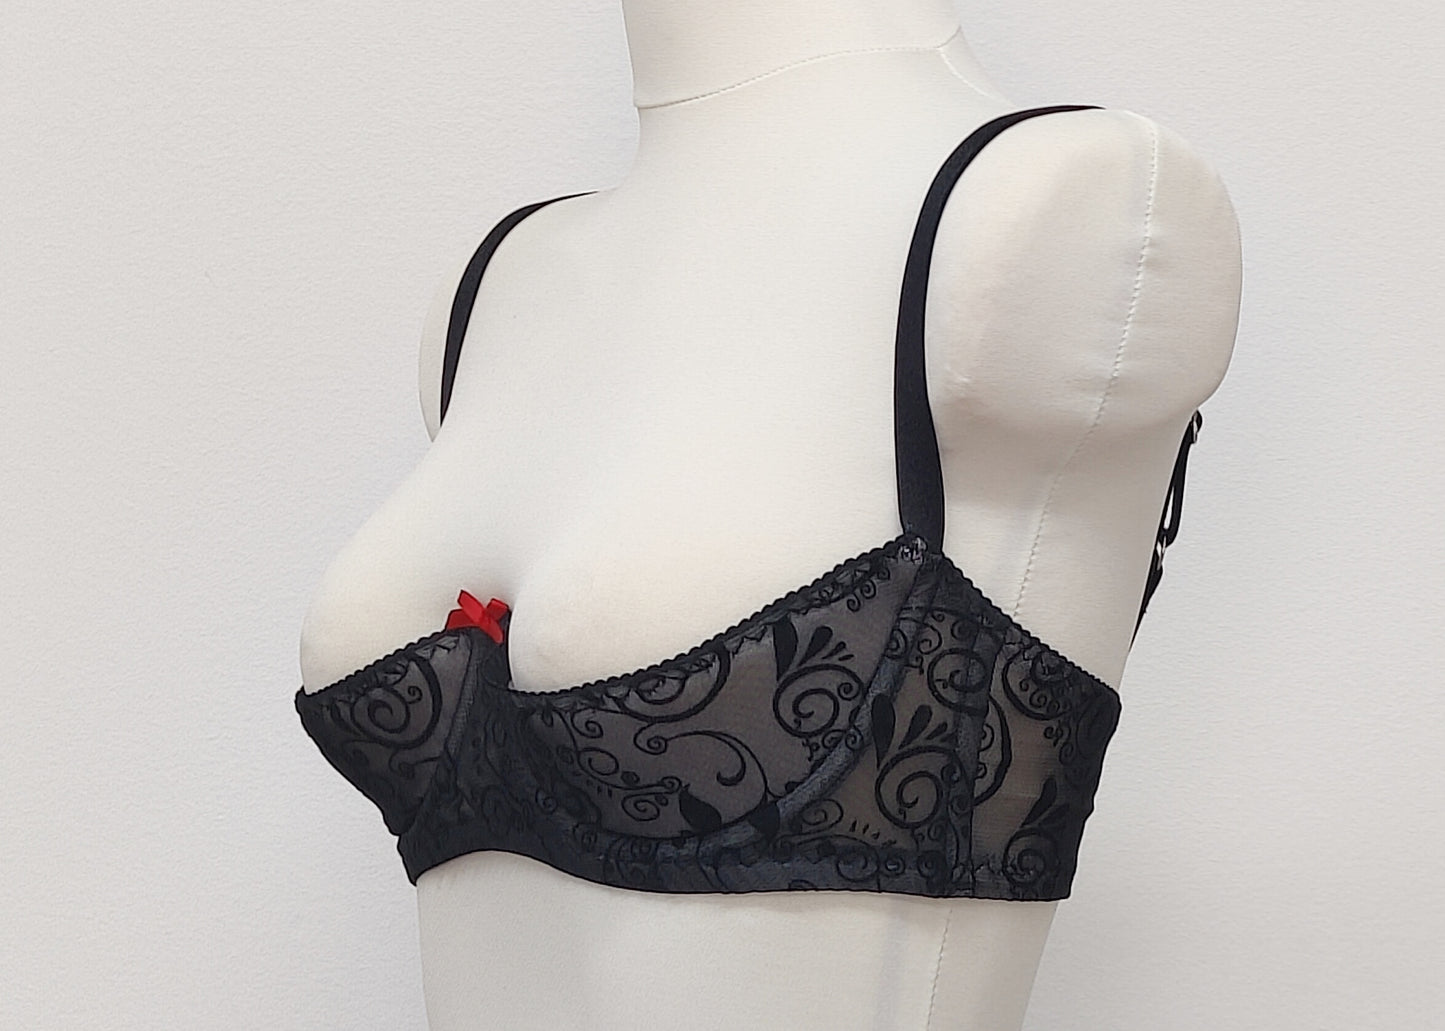 black swirl patterned mesh, quarter cup bra with red bow, side look